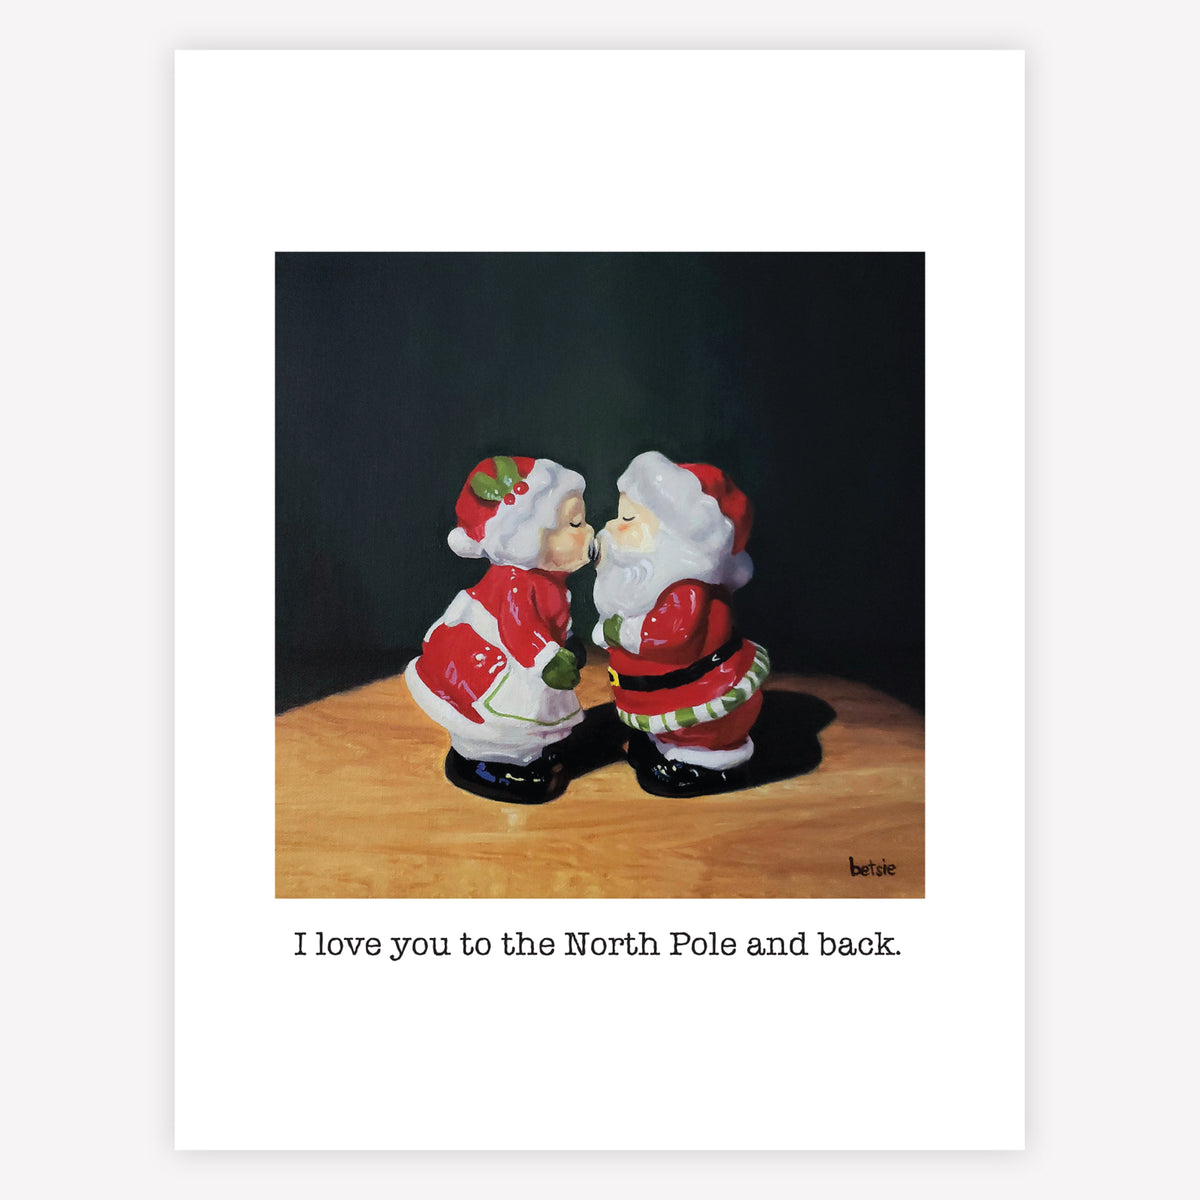 "I love you to the North Pole and back" Greeting Card